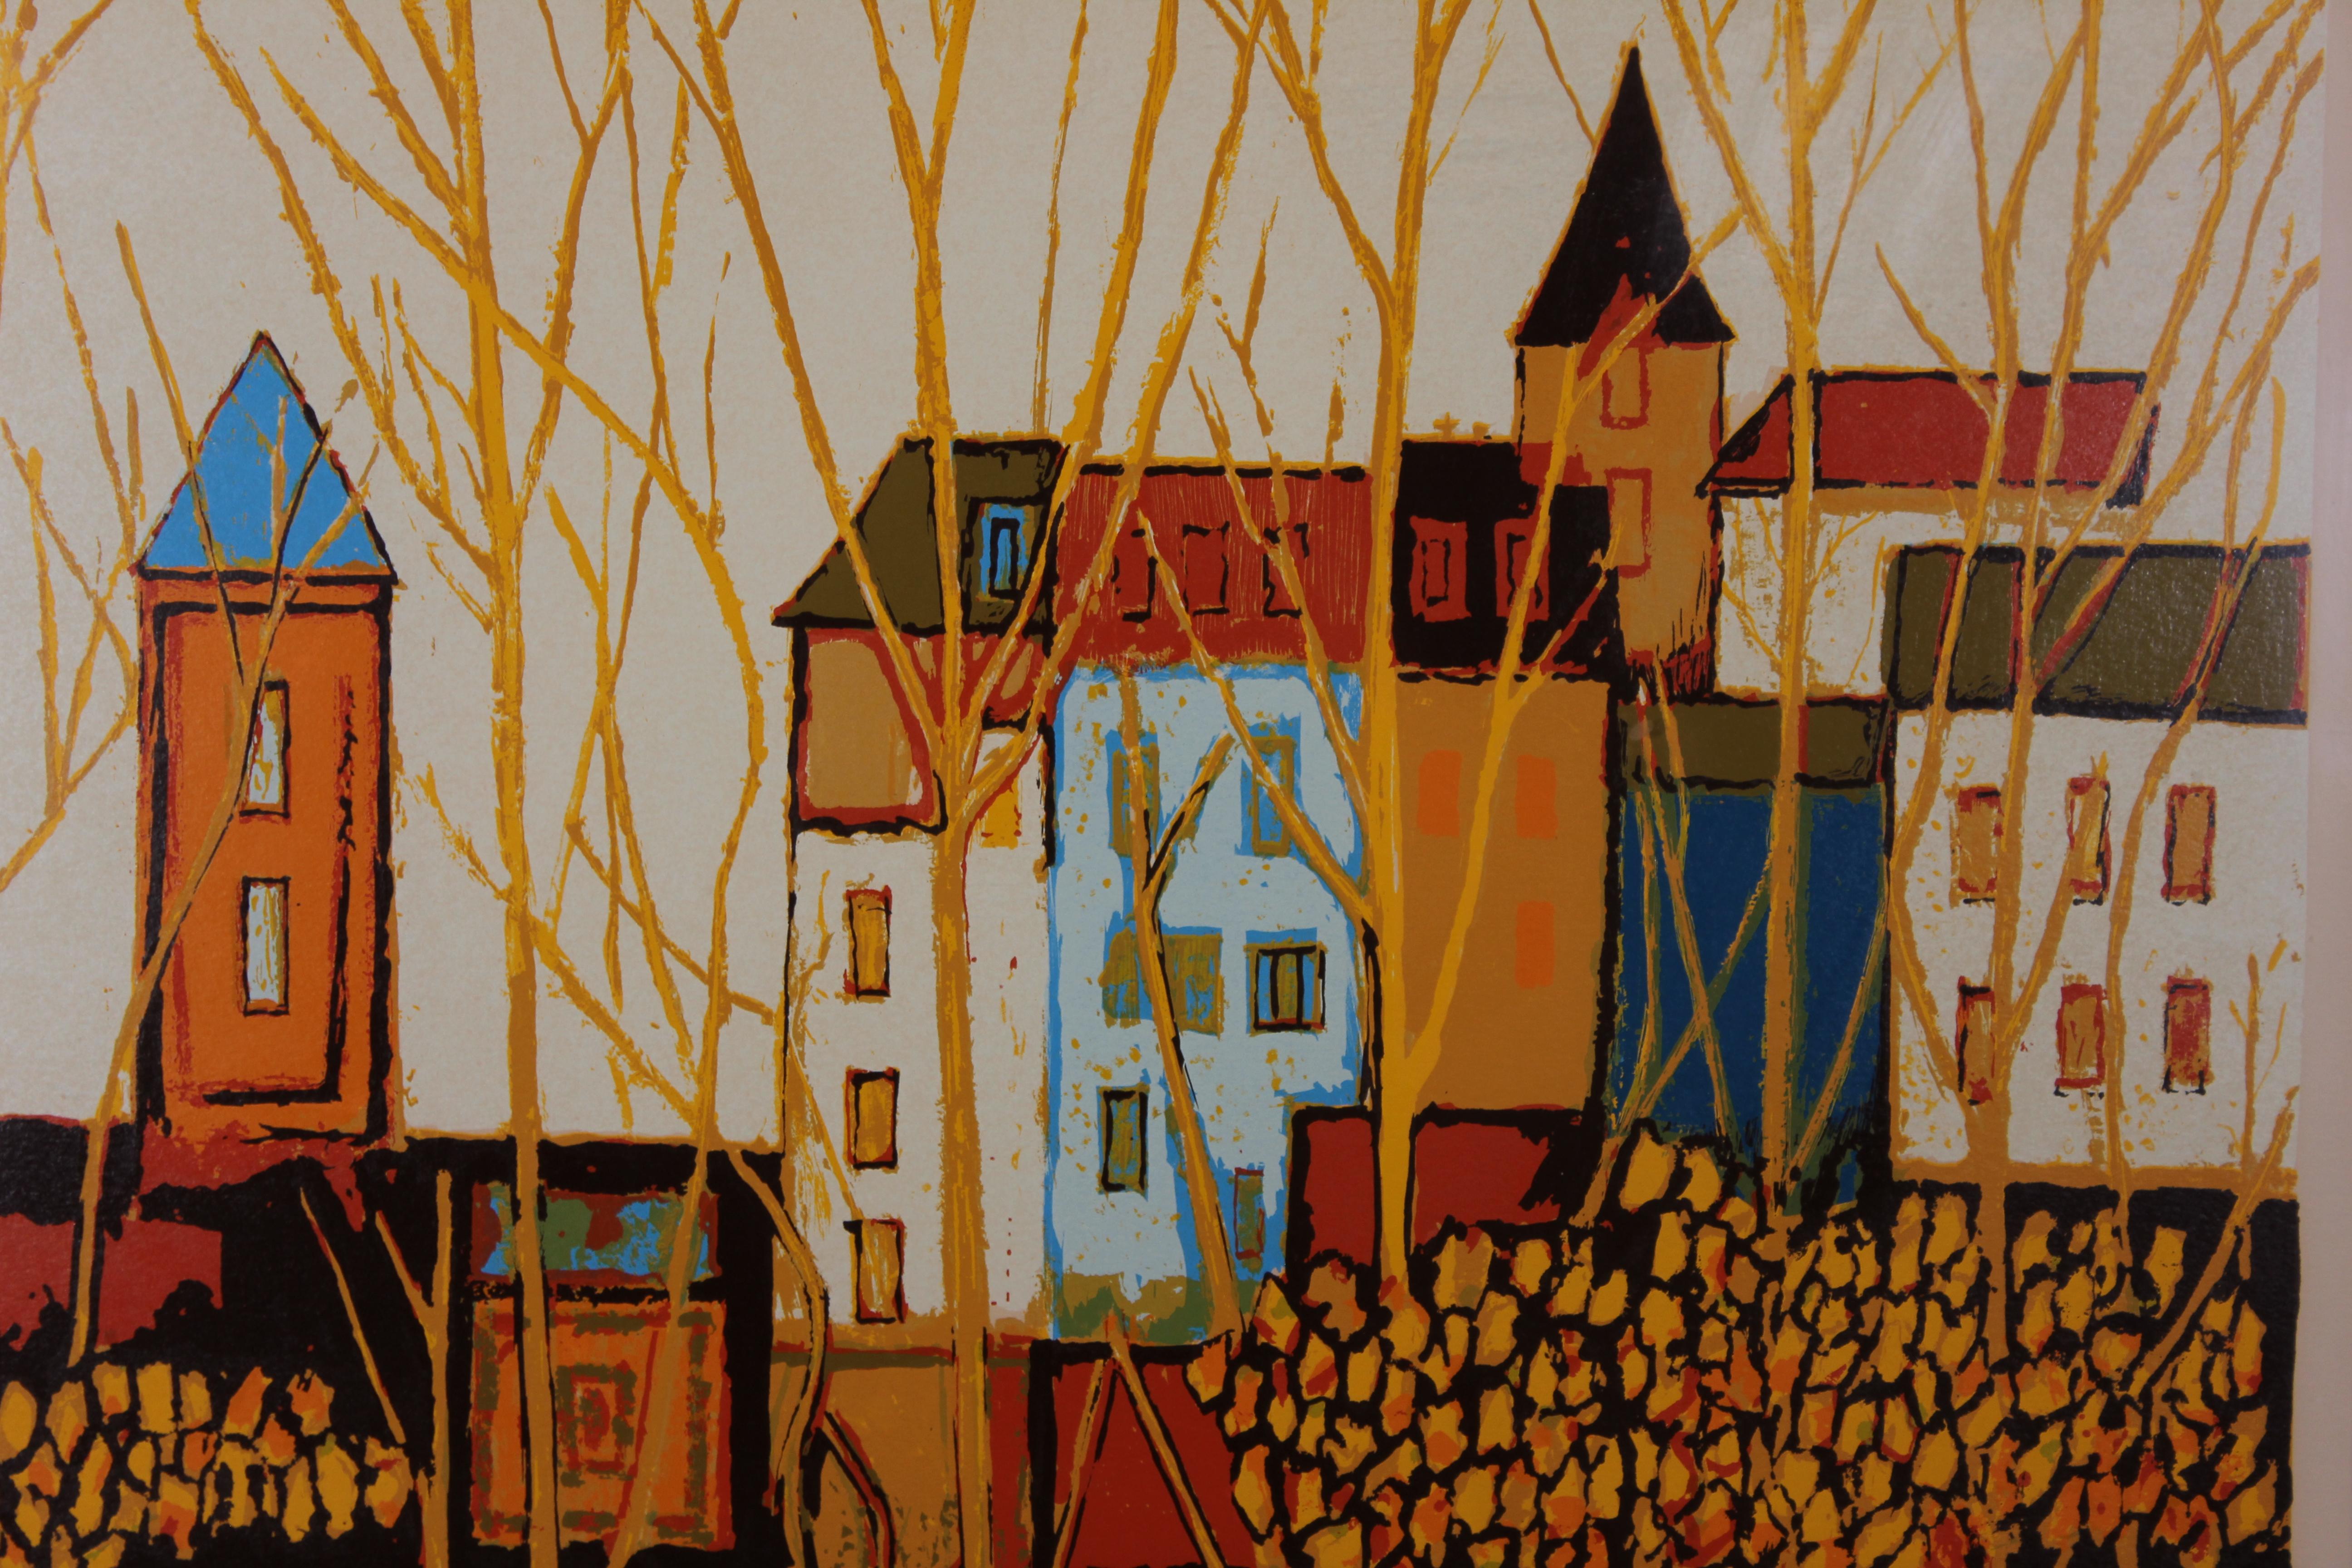 Village Through the Trees Edition 133 of 300 - Painting by David Adickes